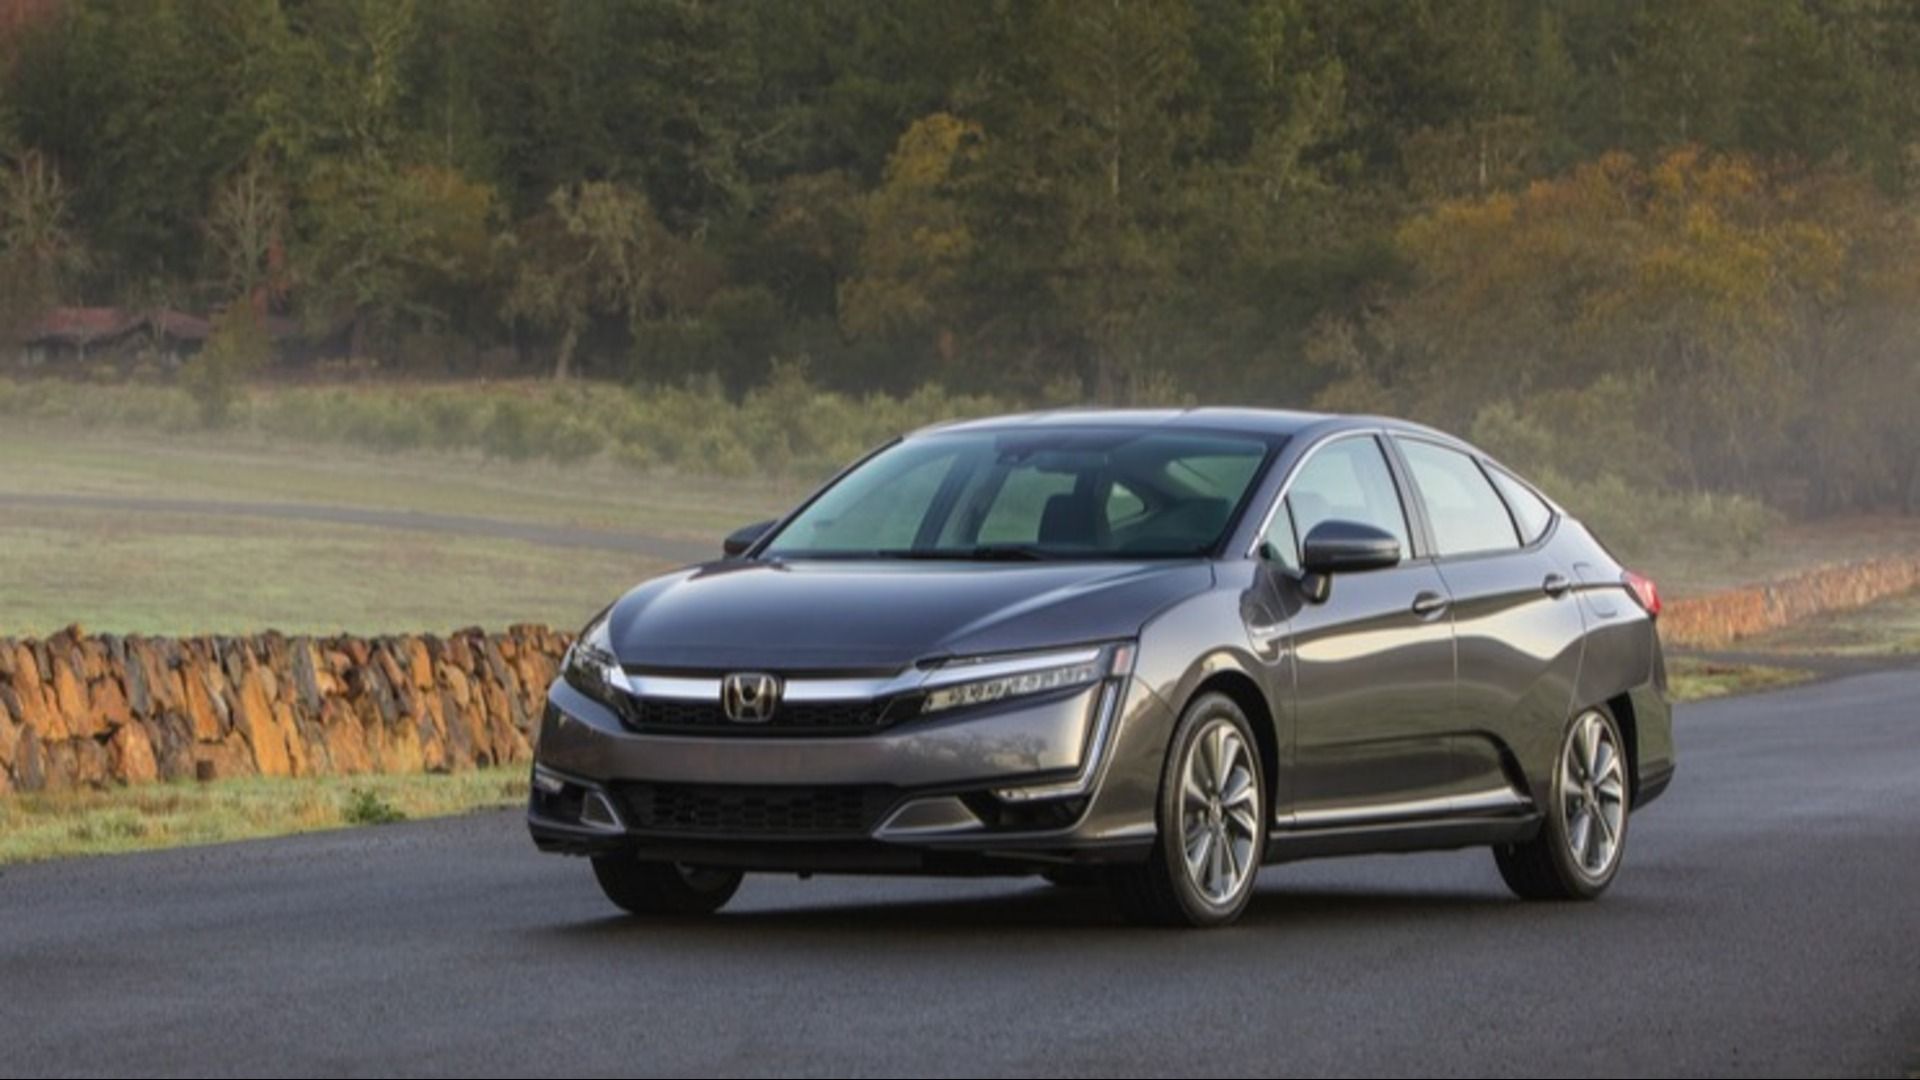 A metallic brown Honda Clarity EV driving on an early-morning misty country road